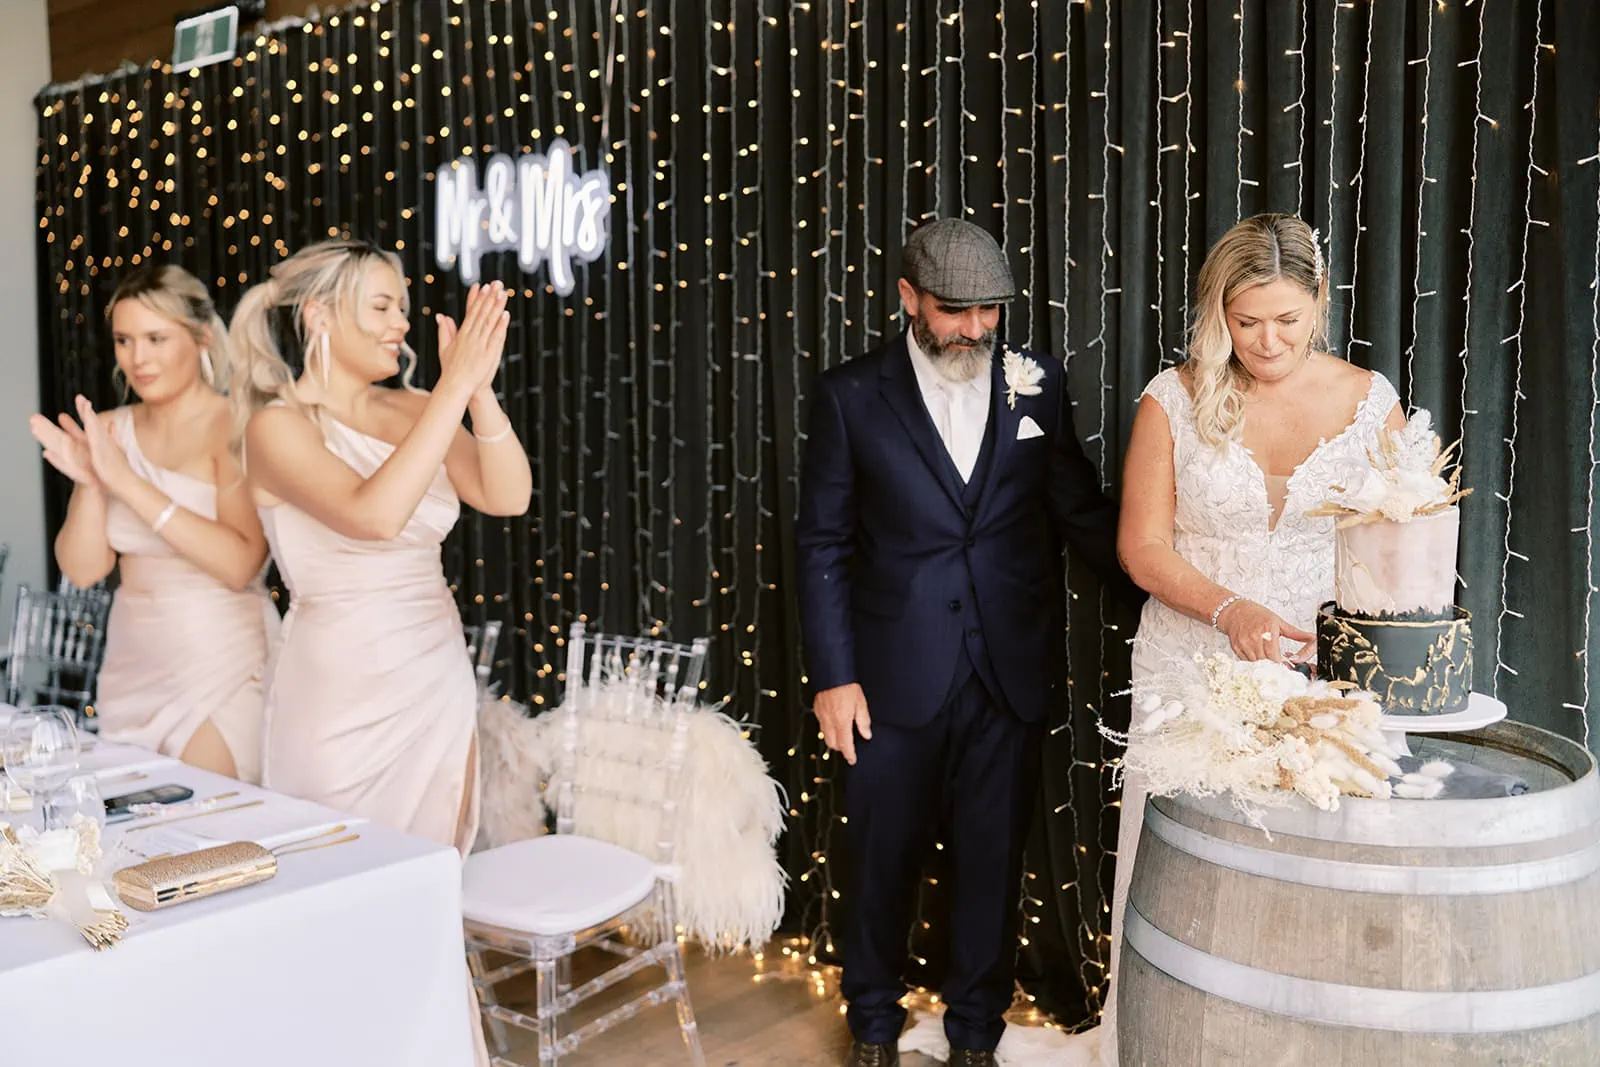 Queenstown Elopement Heli Wedding Photographer クイーンズタウン結婚式 | Melissa & Scott, a newly married couple, celebrate their Queenstown elopement by cutting a beautiful cake at the Kamana Lakehouse winery.